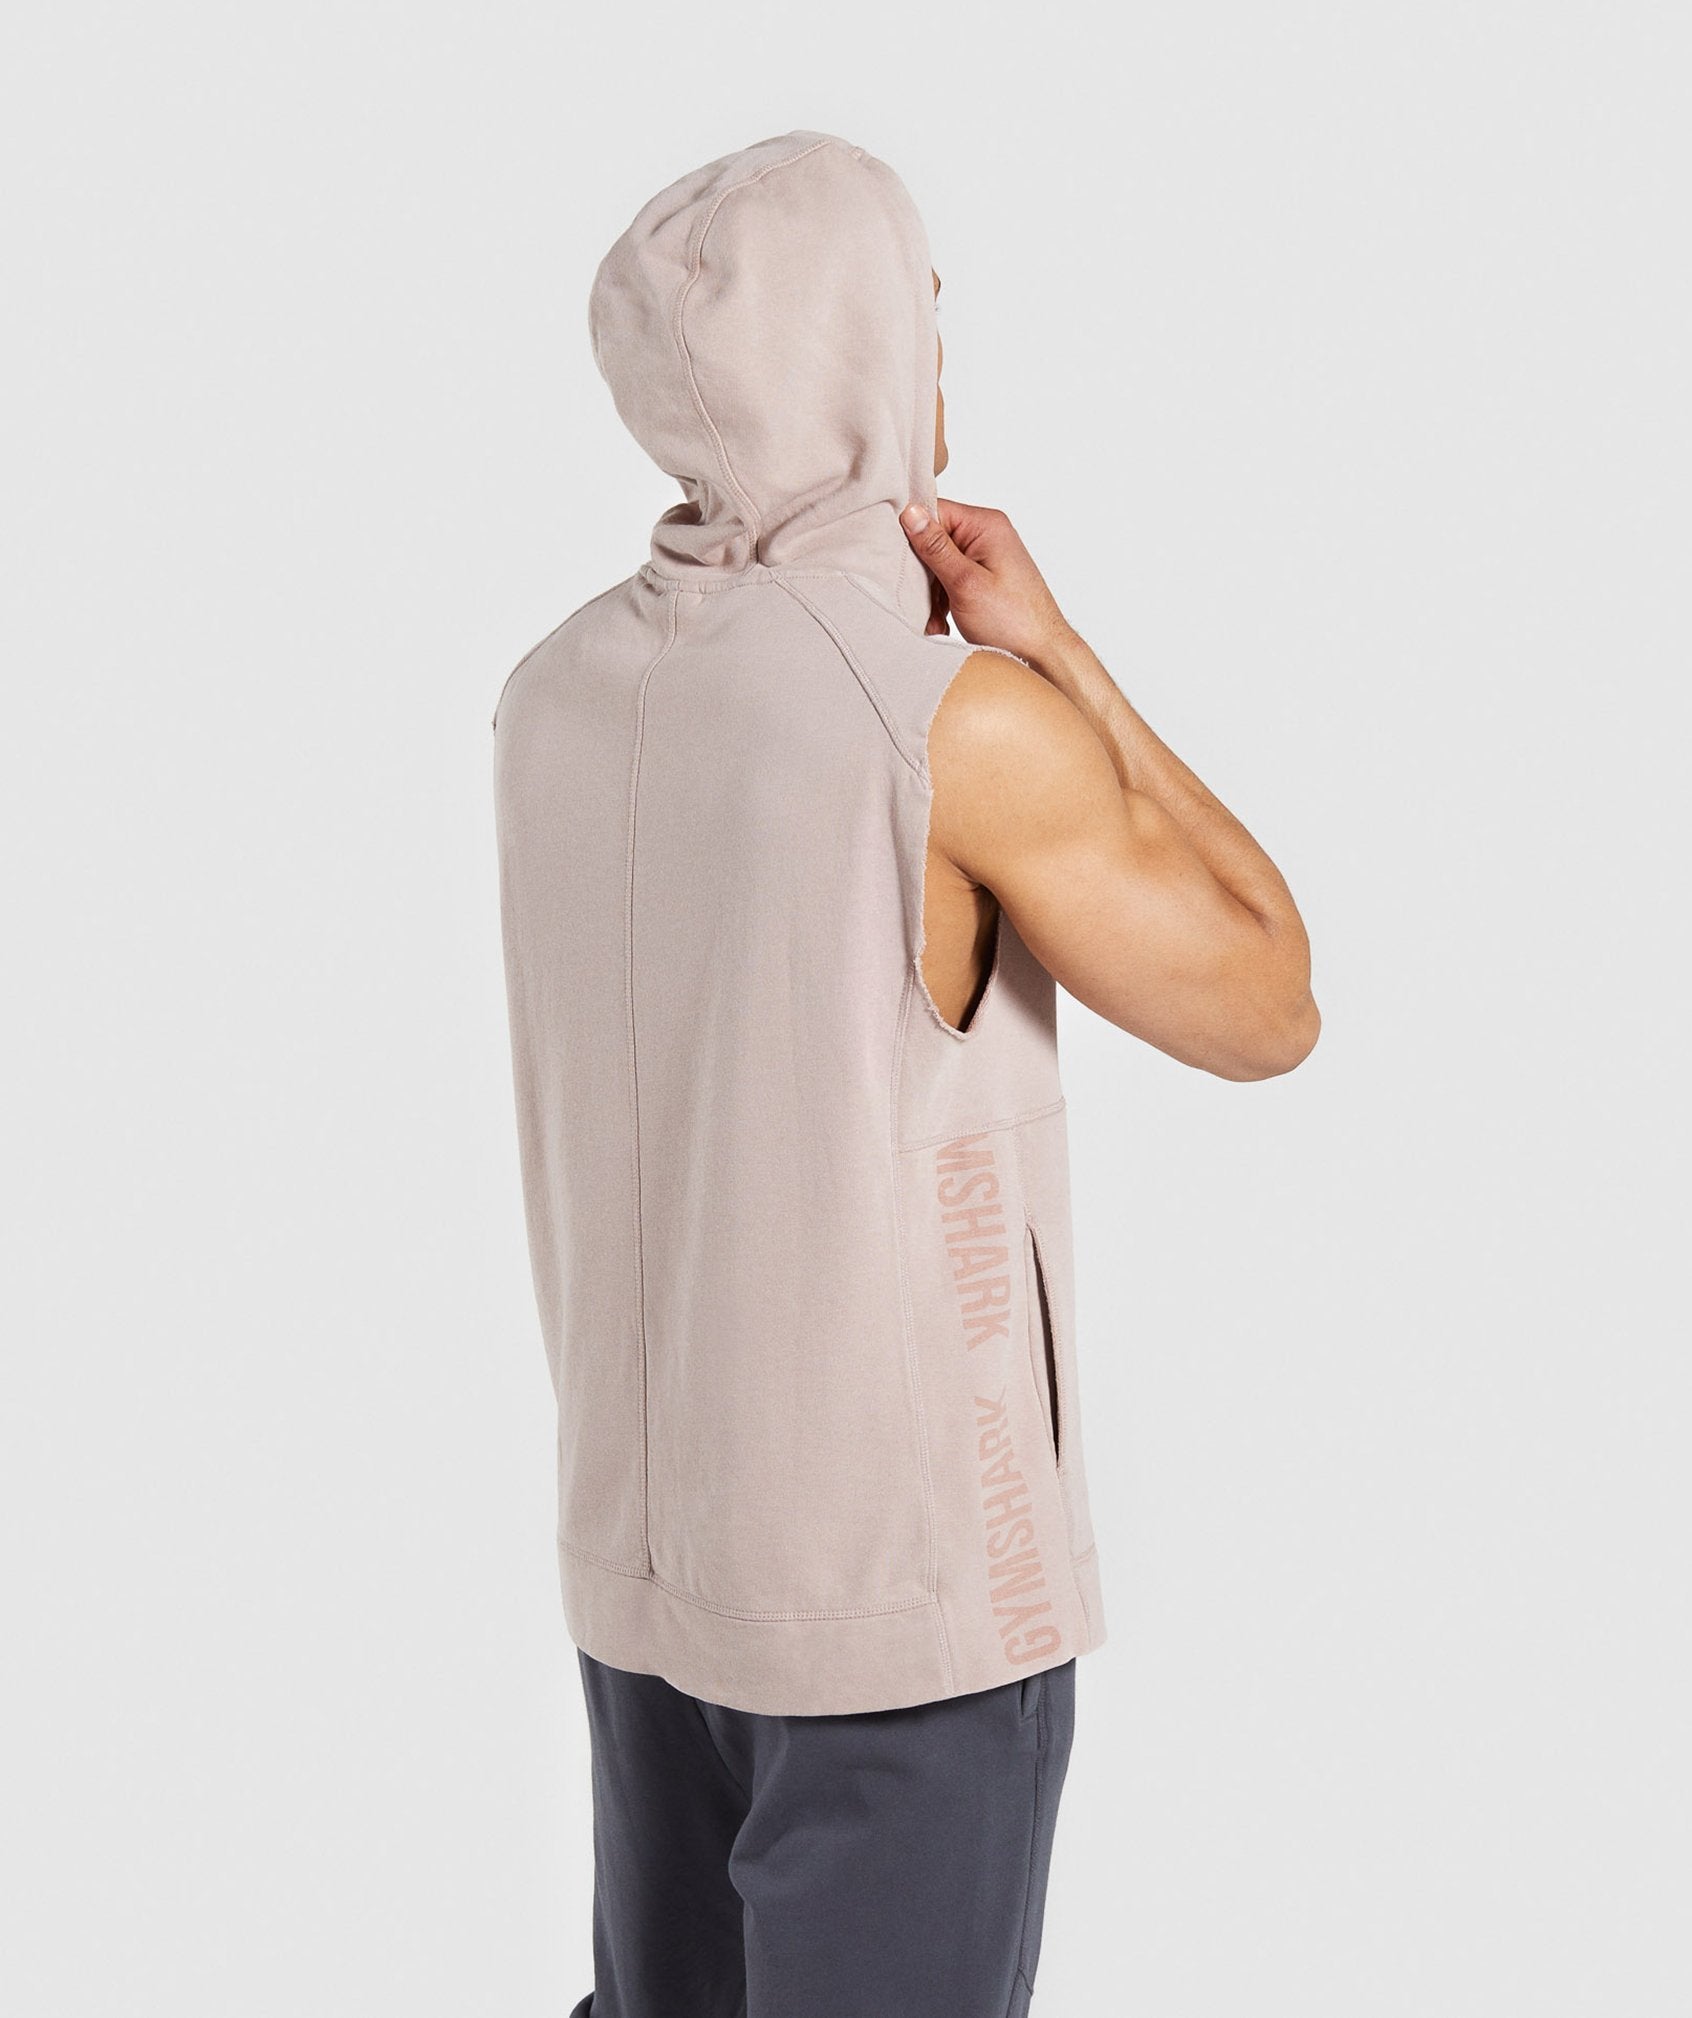 Laundered Sleeveless Hoodie in Nude - view 2